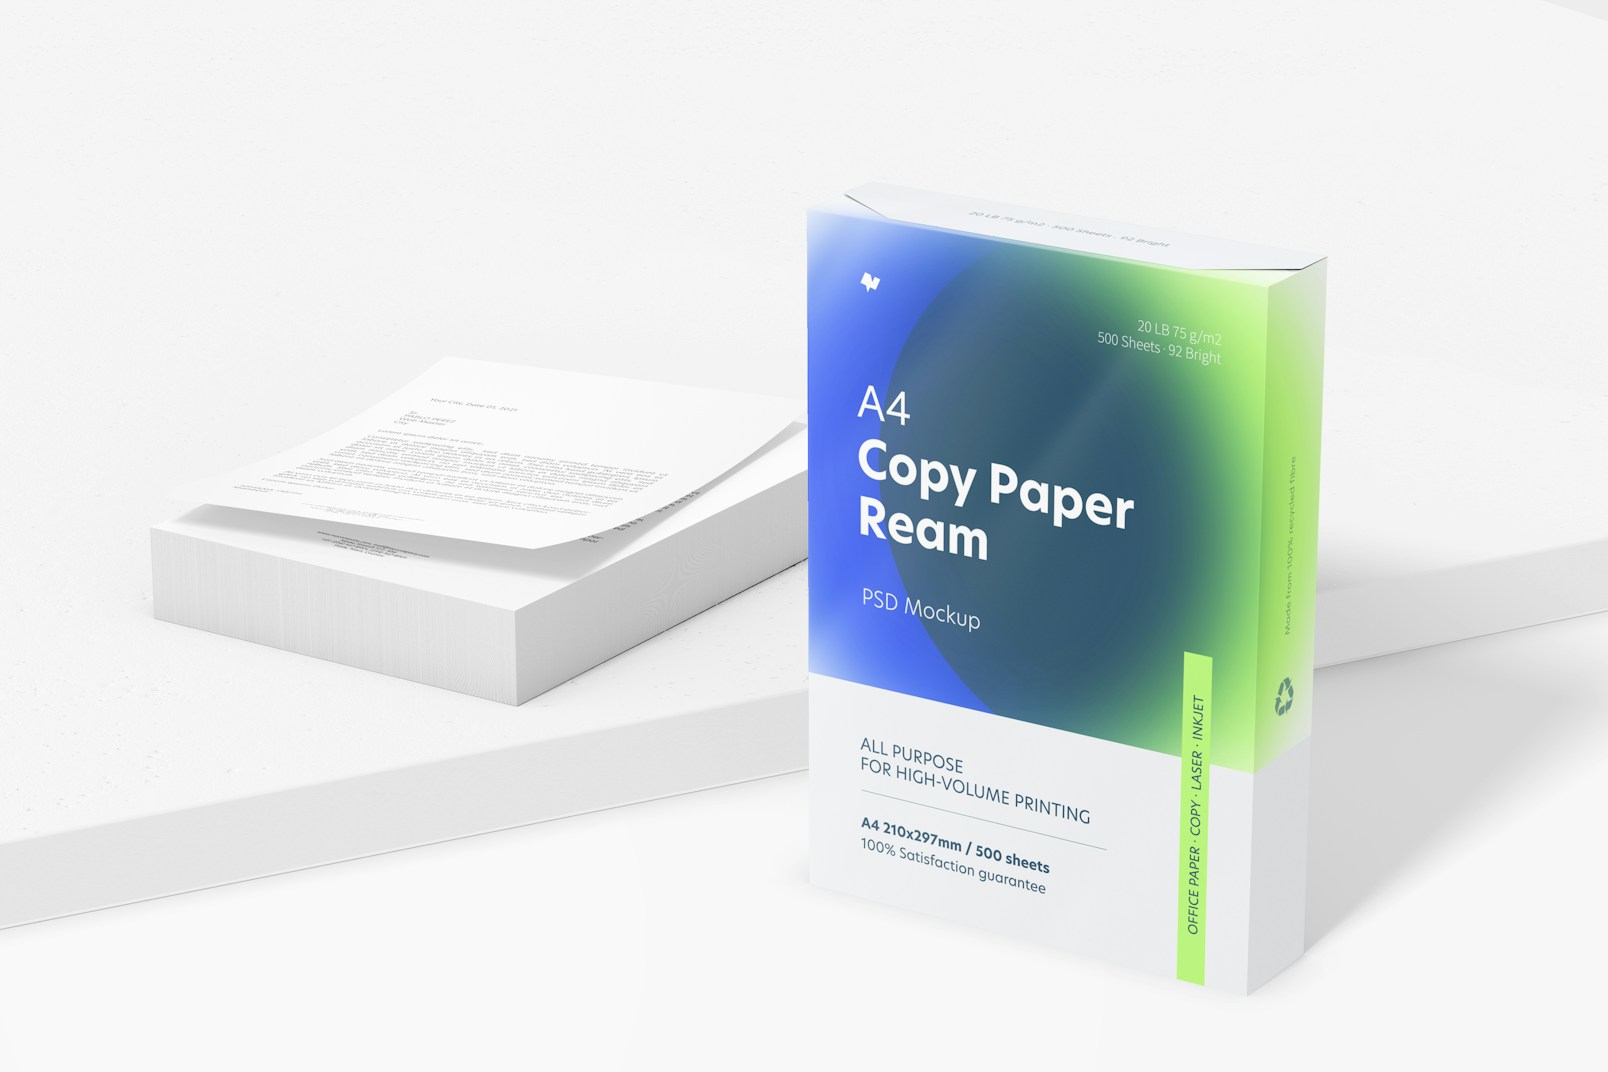 A4 Copy Paper Ream Mockup, Right View